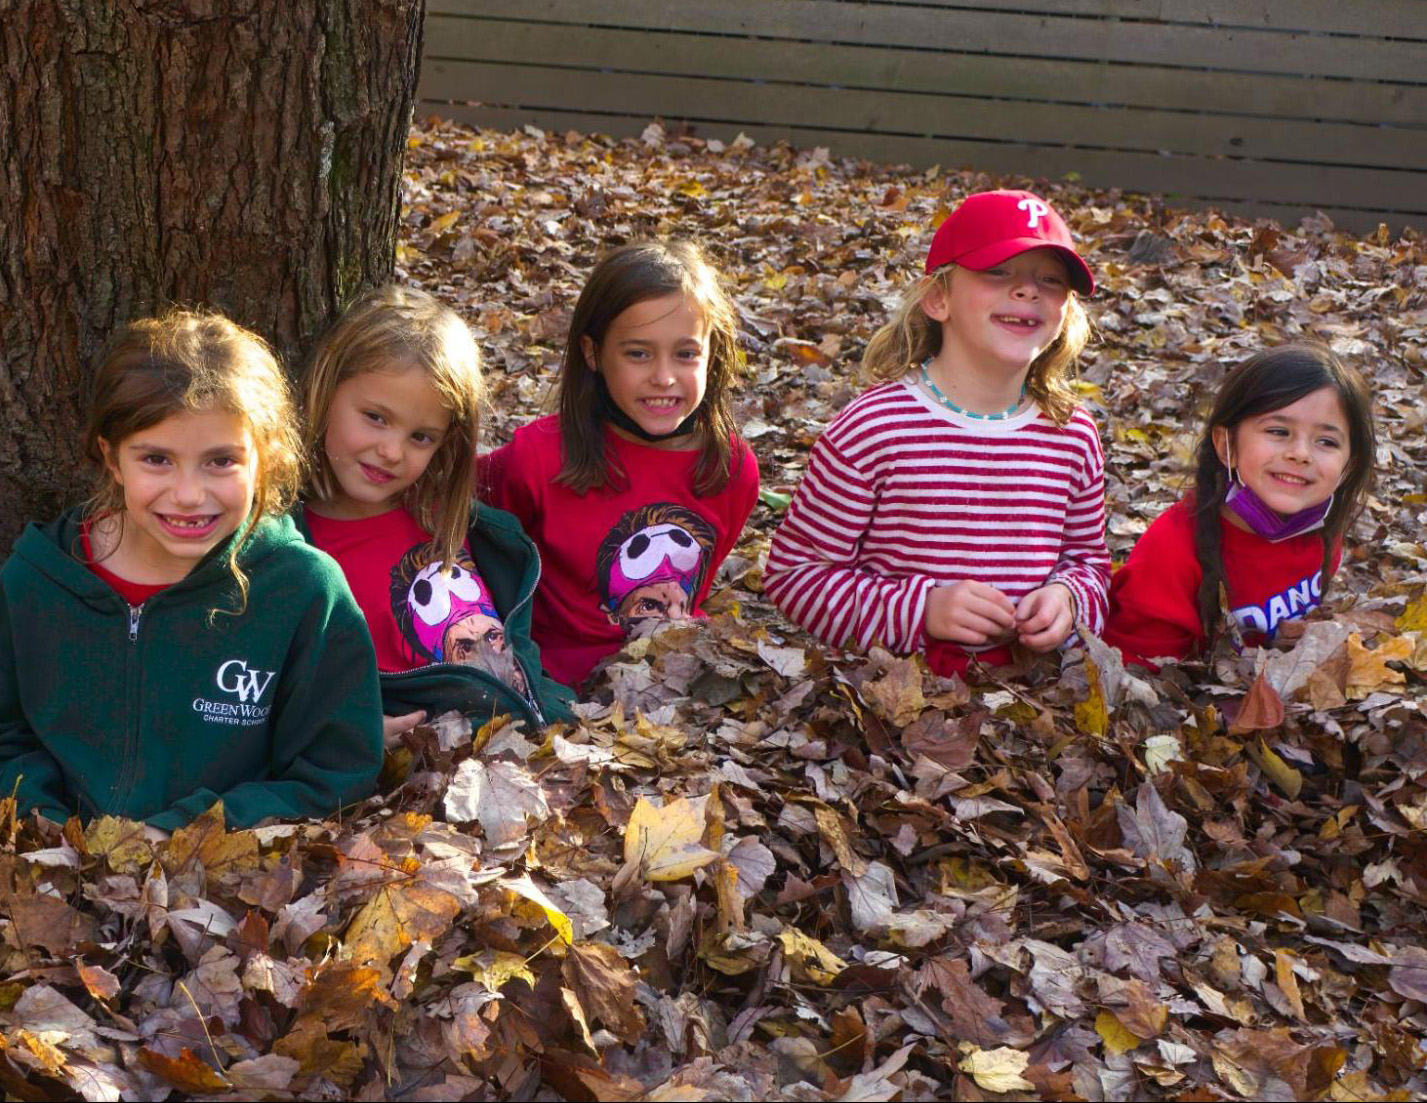 Children sitting in a pile of leaves